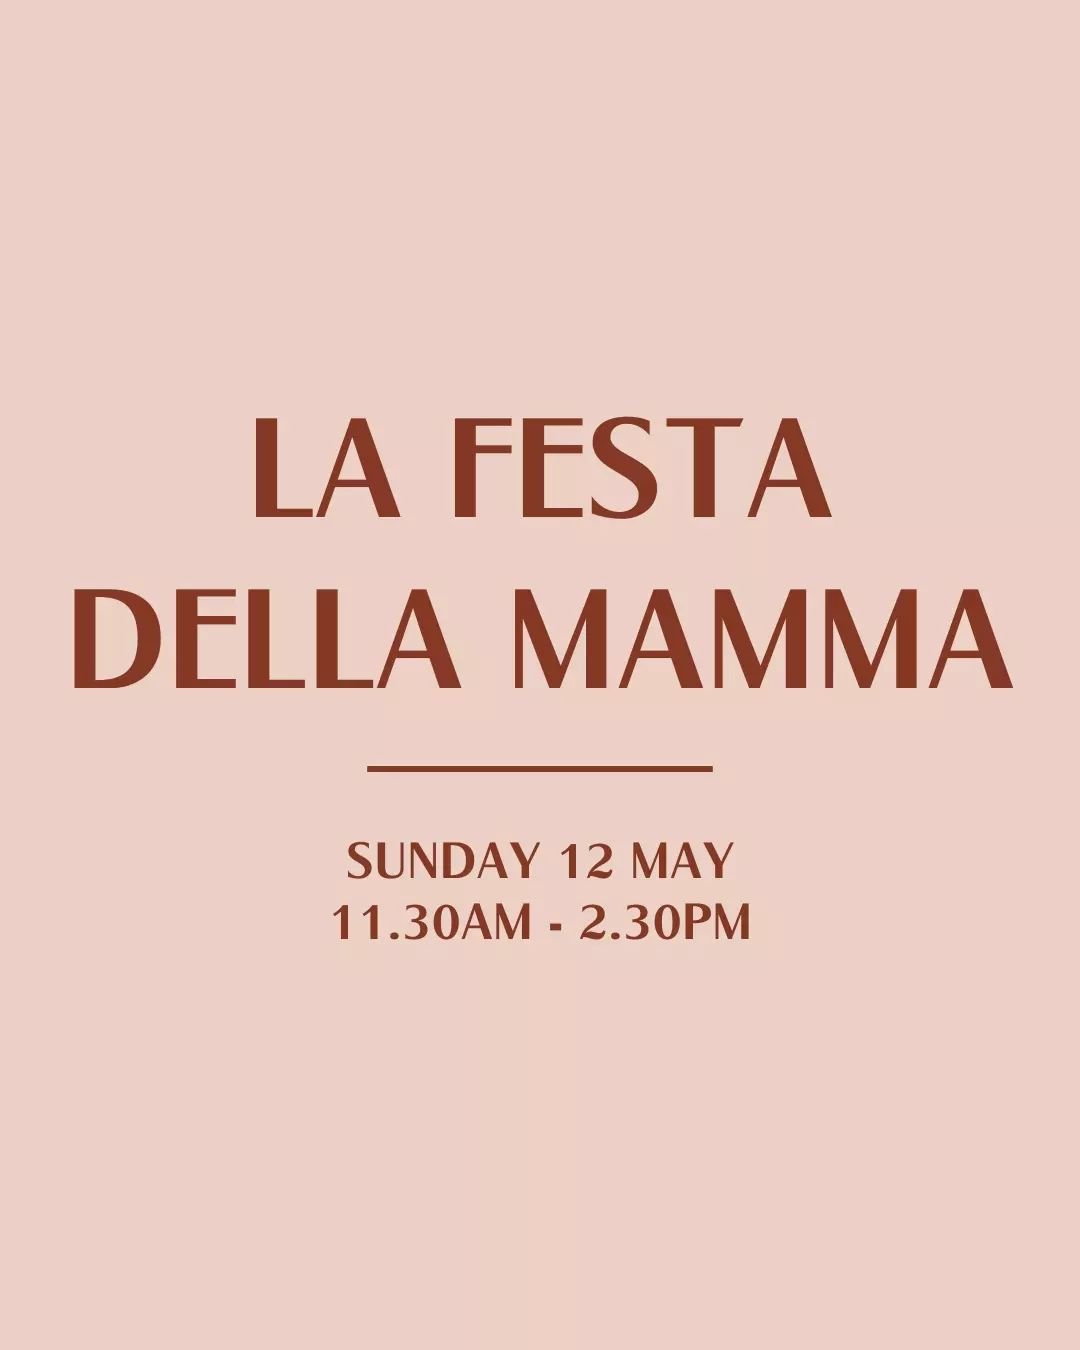 LA FESTA DELLA MAMMA!&nbsp;💕🥂 

Celebrate Mamma at Cecchis this Mother&rsquo;s Day with all her favourite Italian dishes.&nbsp;

Bring along la famiglia and enjoy our Nonna-style share menu and a complimentary glass of Prosecco for Mamma for $80pp 